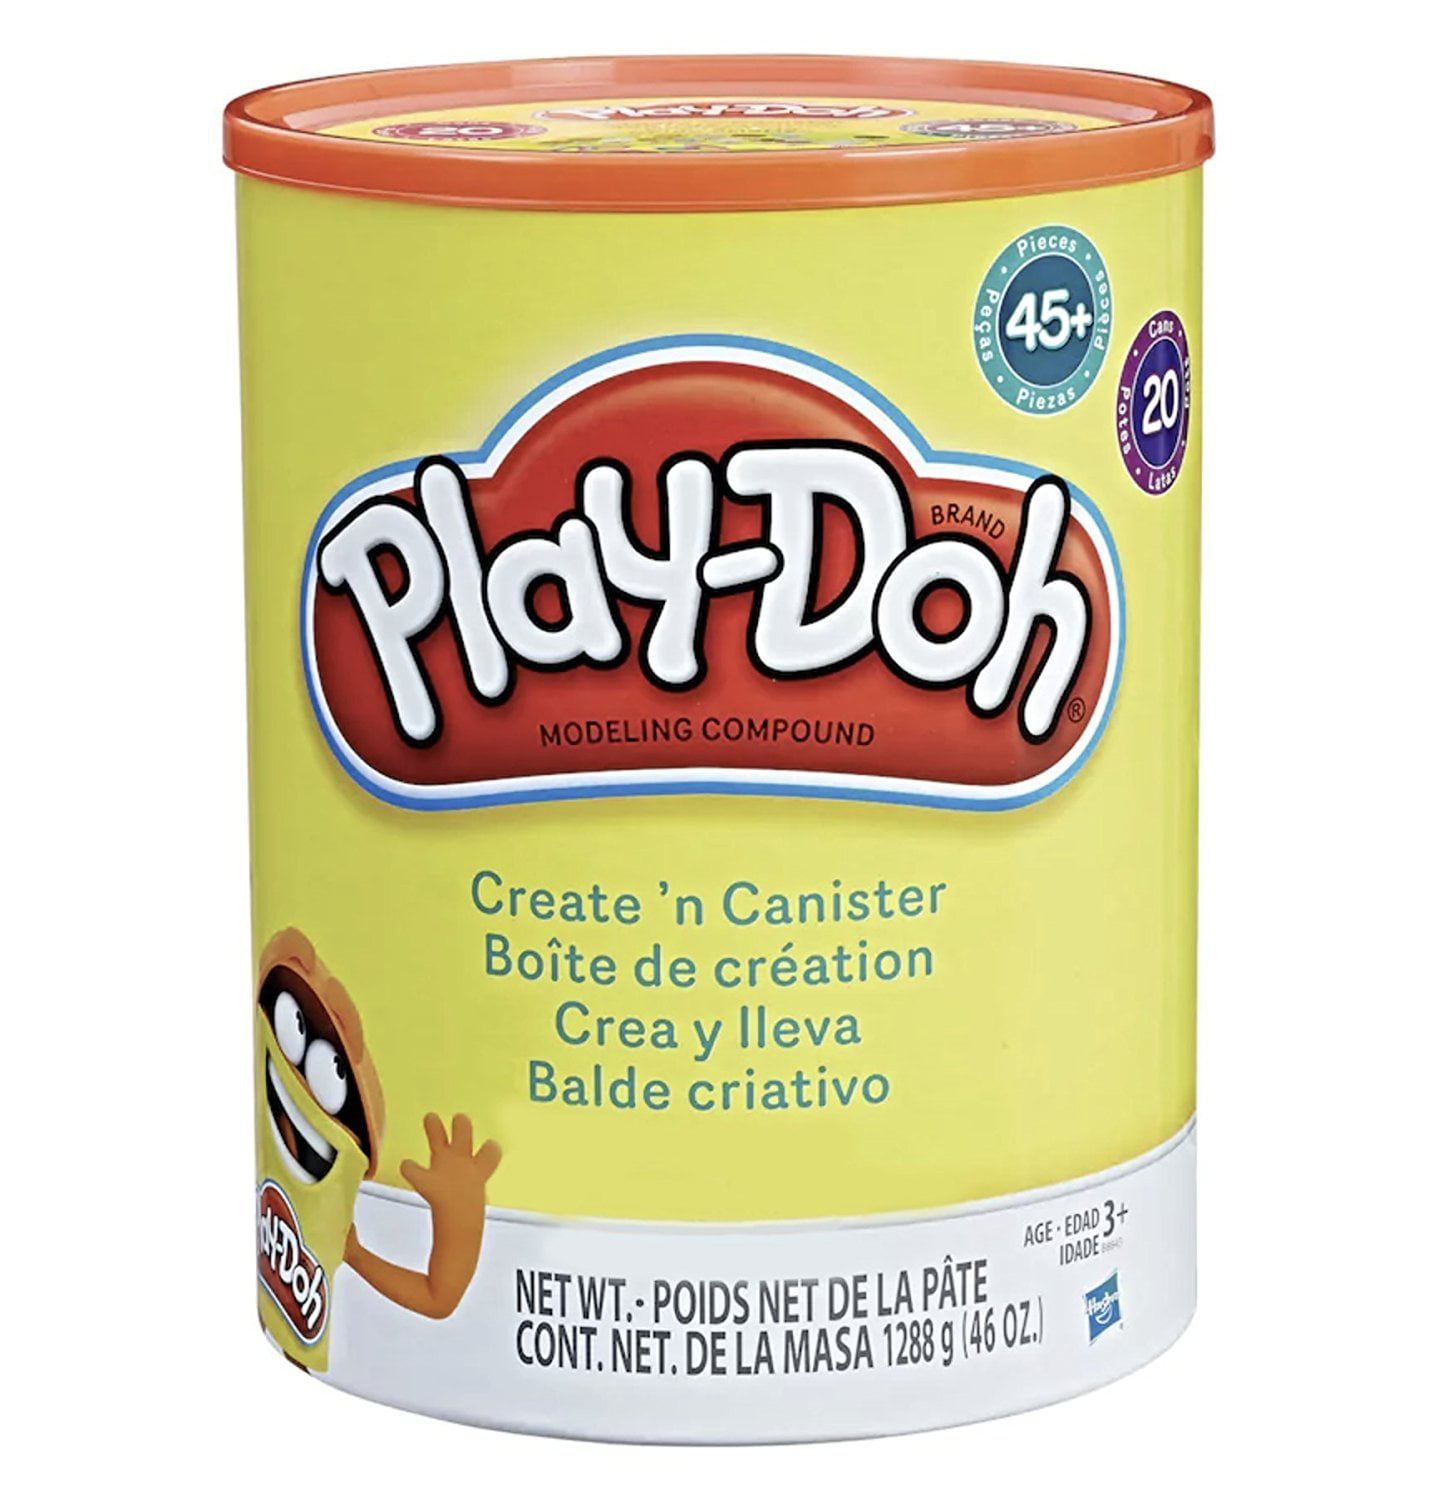 Years 3 *New* HASBRO Play-Doh Create 'n Canister w 20pc Piece Cans of Play Doh 